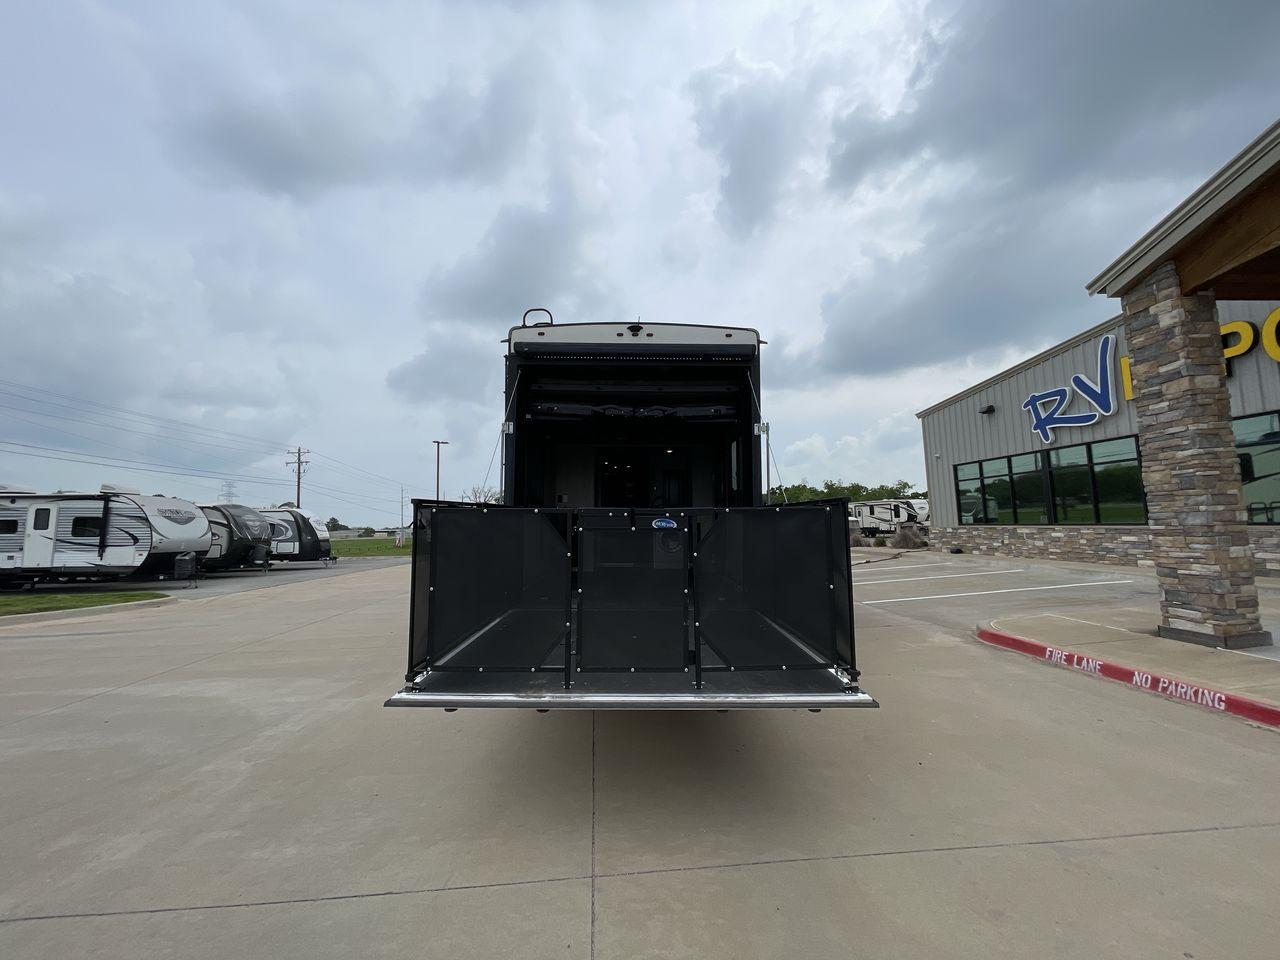 2019 HEARTLAND ROAD WARRIOR 427RW (5SFCG4435KE) , Length: 44.08 ft. | Dry Weight: 16,400 lbs. | Gross Weight: 20,000 lbs. | Slides: 2 transmission, located at 4319 N Main Street, Cleburne, TX, 76033, (817) 221-0660, 32.435829, -97.384178 - The 2019 Heartland Road Warrior 427RW fifth wheel toy hauler is ready for your next journey. The length of this amazing RV is 44.08 feet, its dry weight is 16,400 lbs and its gross weight is 20,000 lbs. This makes it stable and long-lasting on the road. This RV is strong and stylish, with two slides - Photo #27